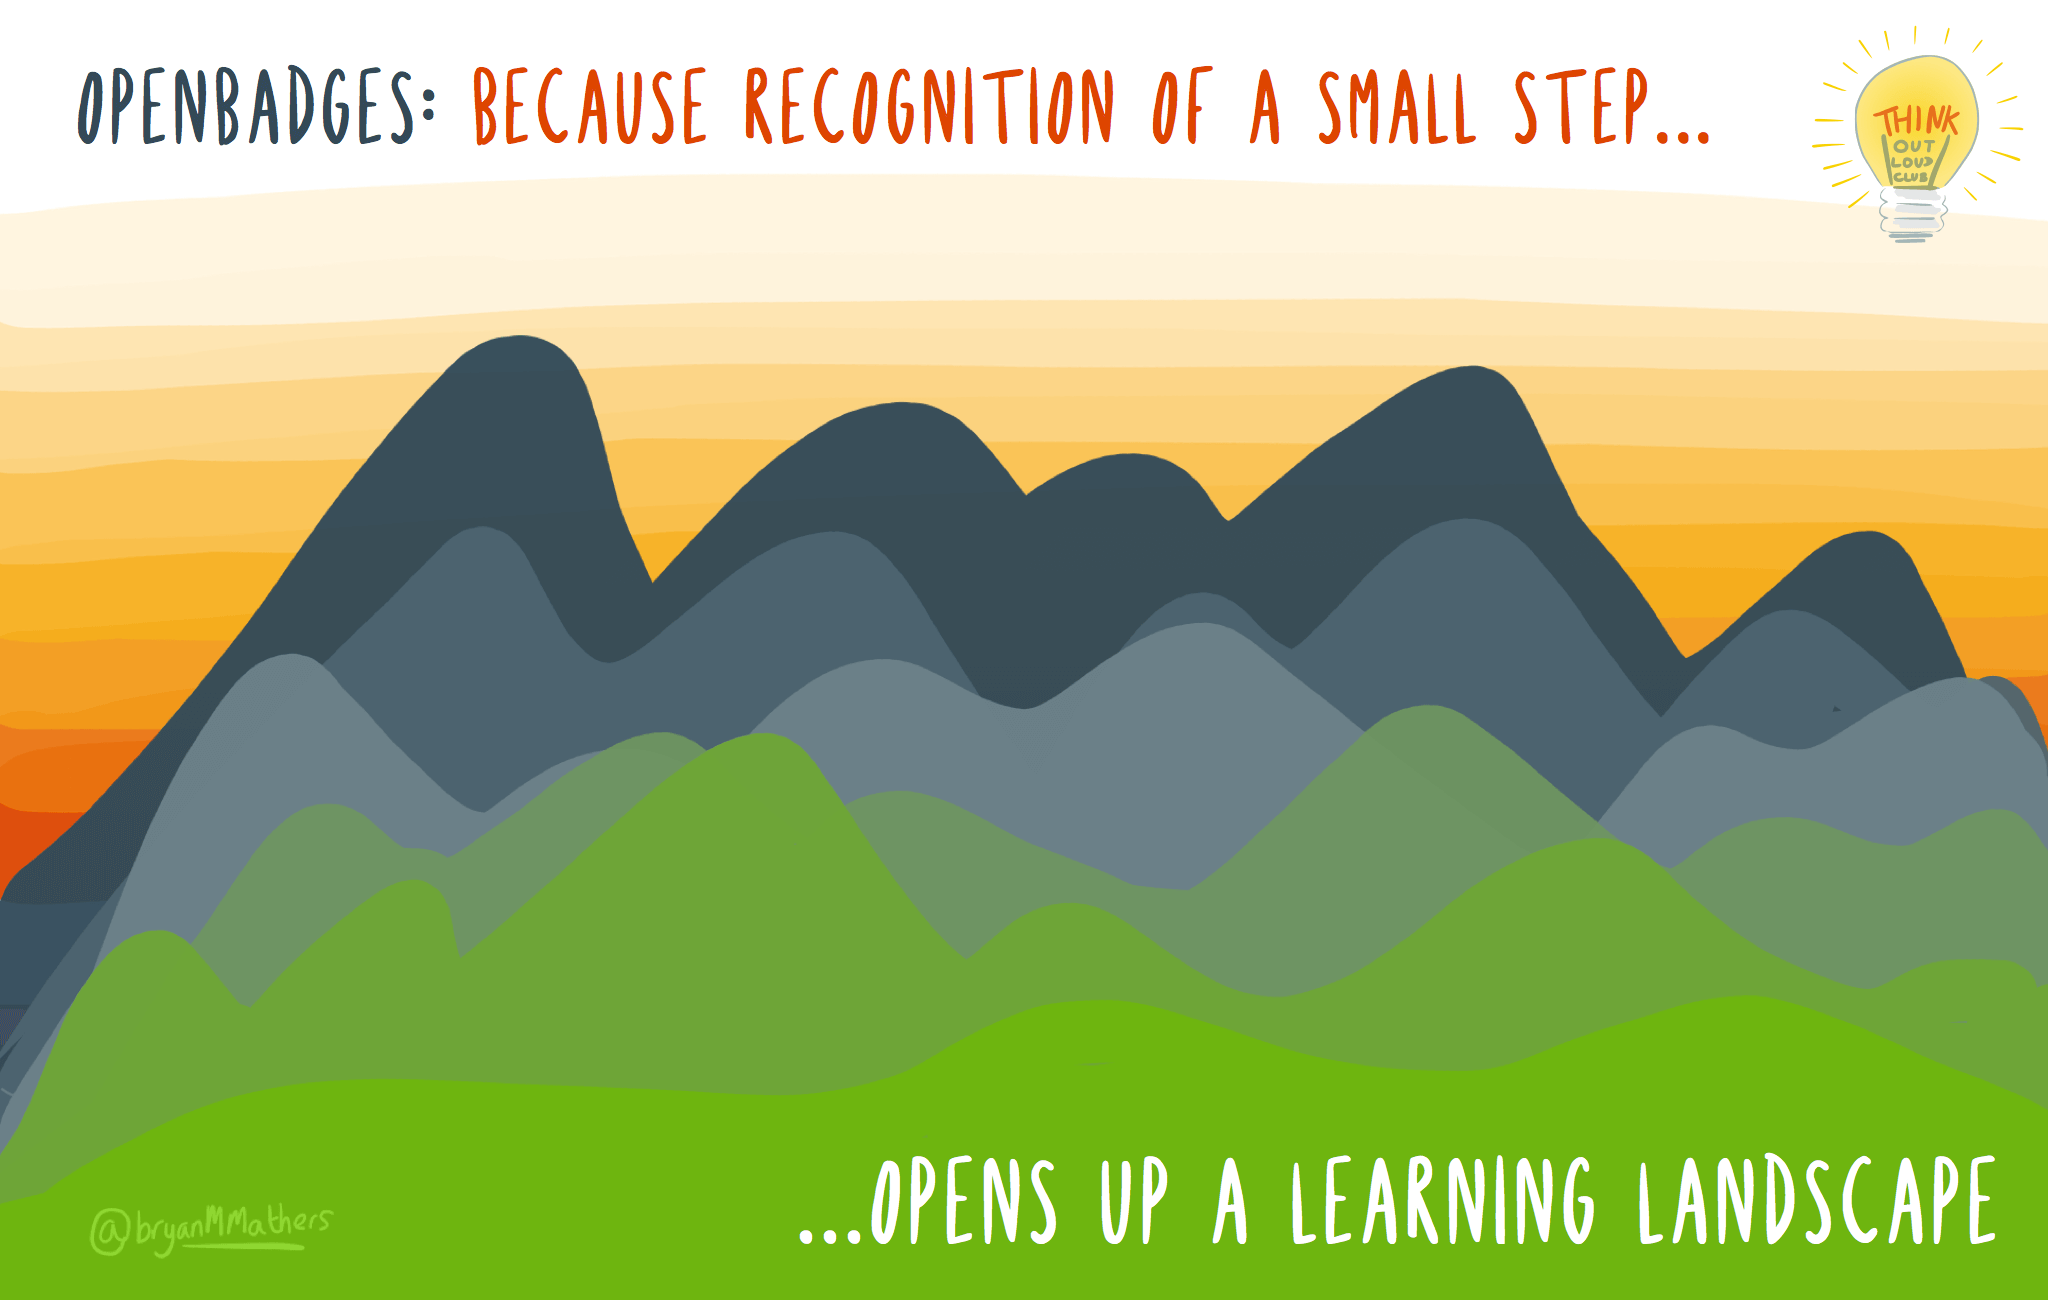 Small step - learning landscape